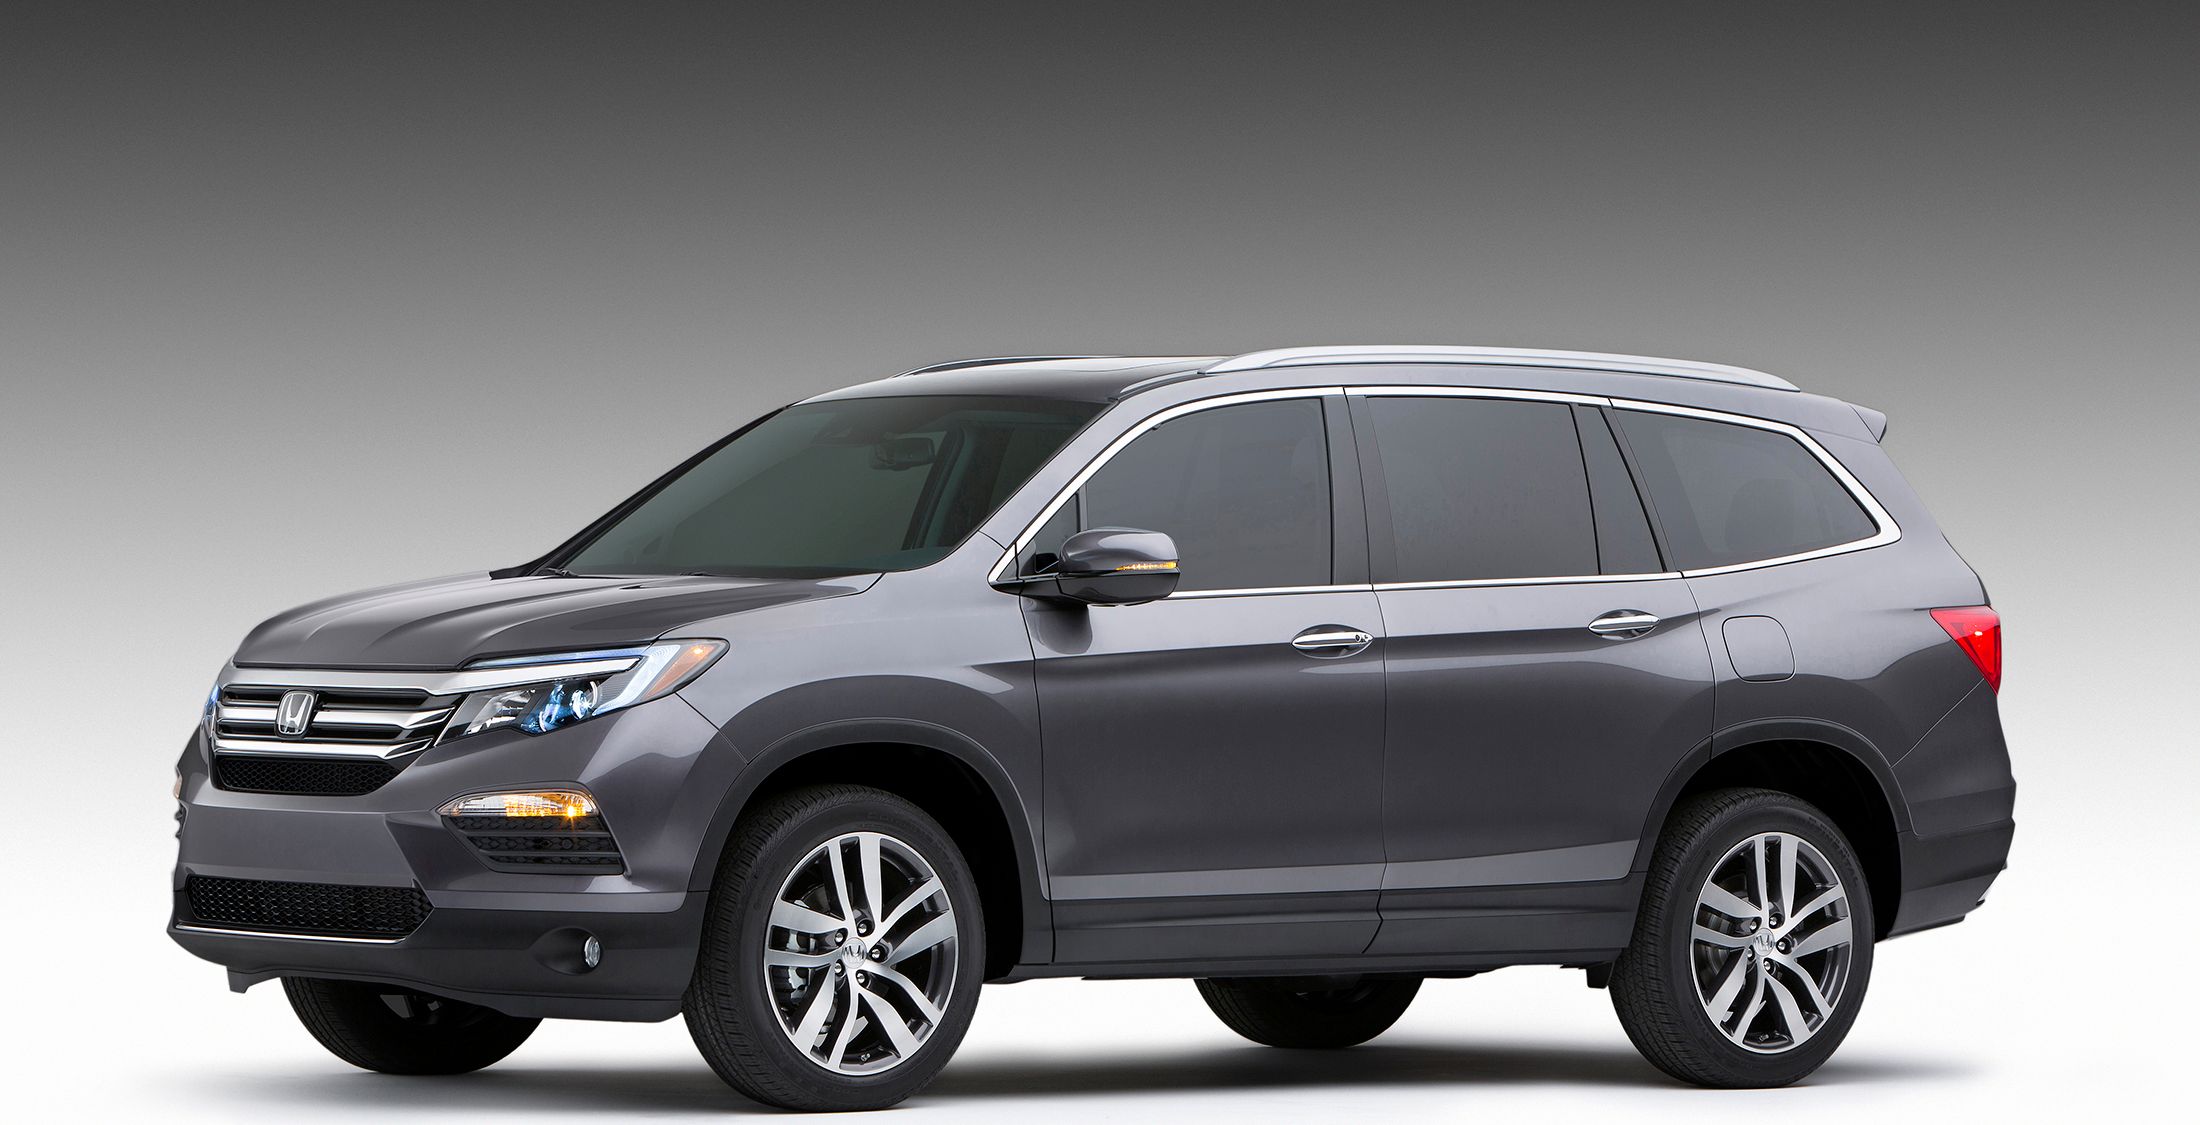 20 SUVs With the Best Gas Mileage GOBankingRates